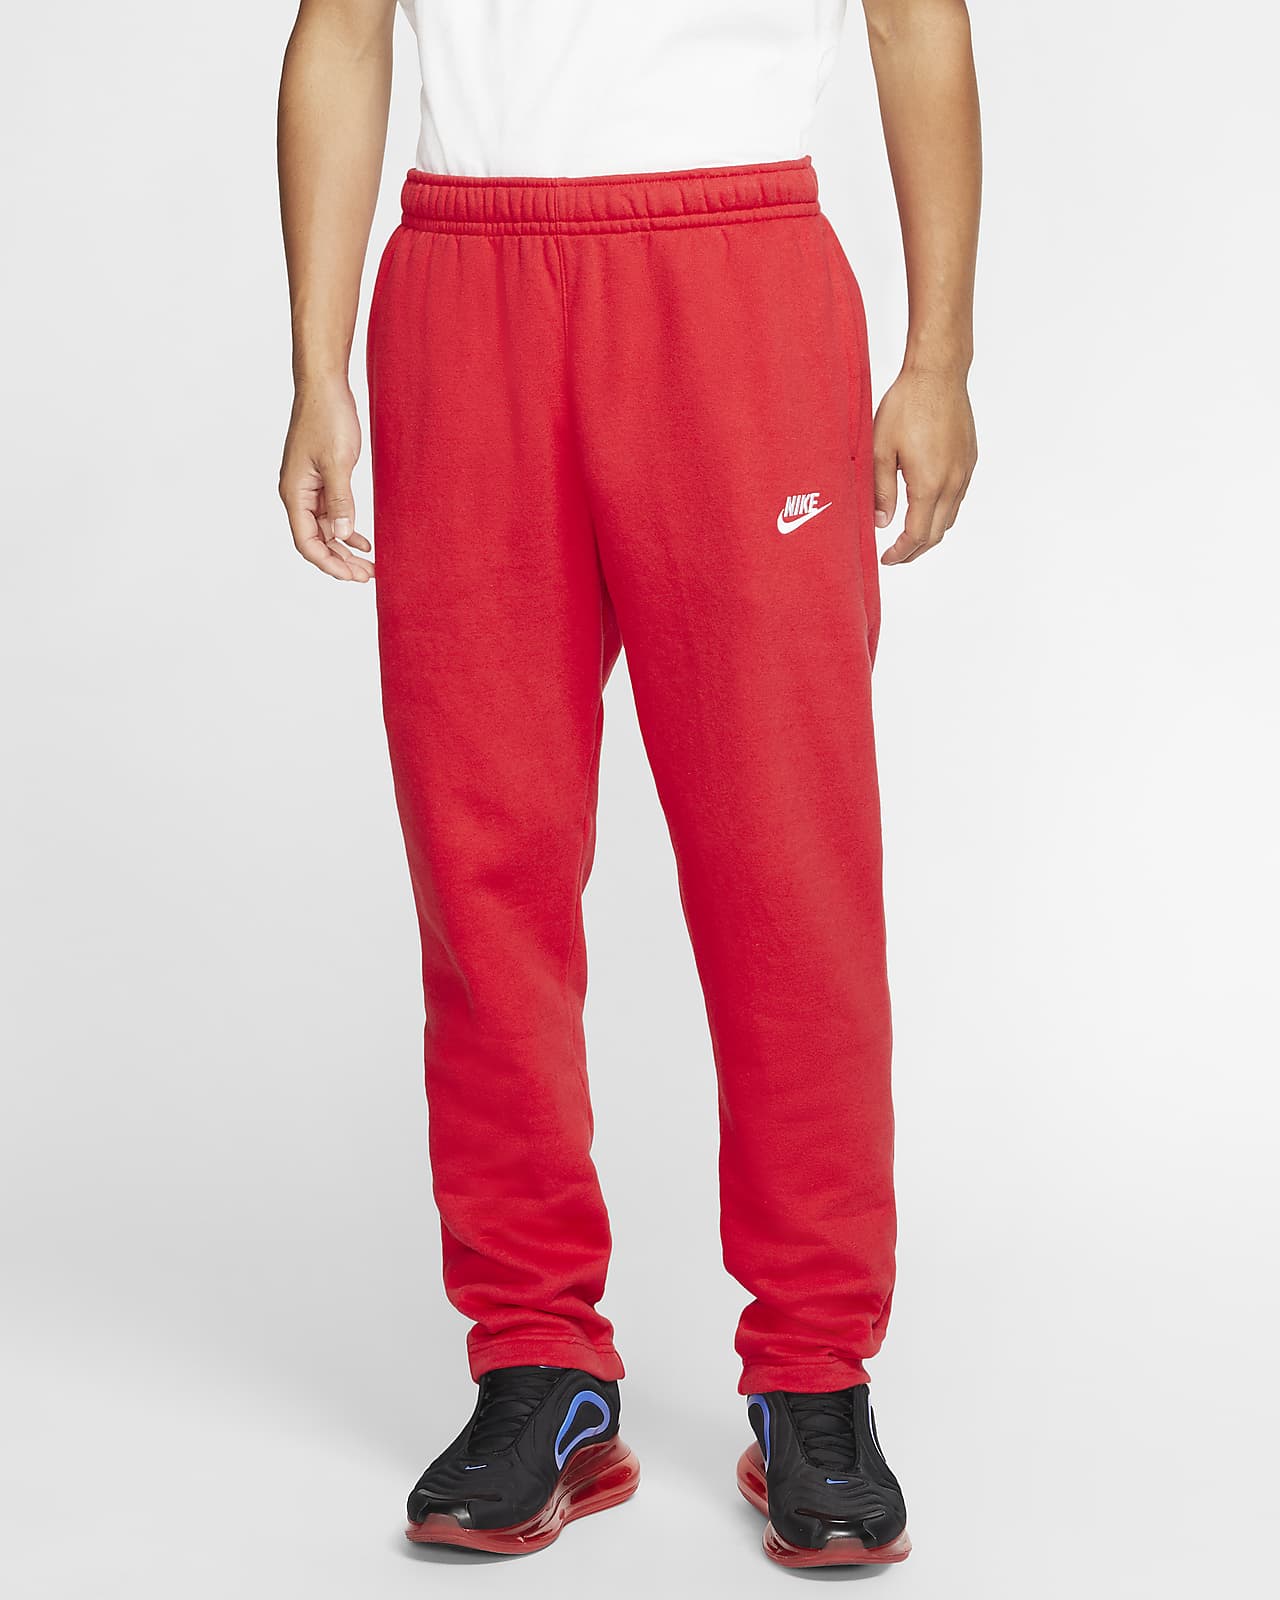 Nike Sportswear Reissue Track Pant  Track pants mens, Nike clothes mens,  Pants outfit men